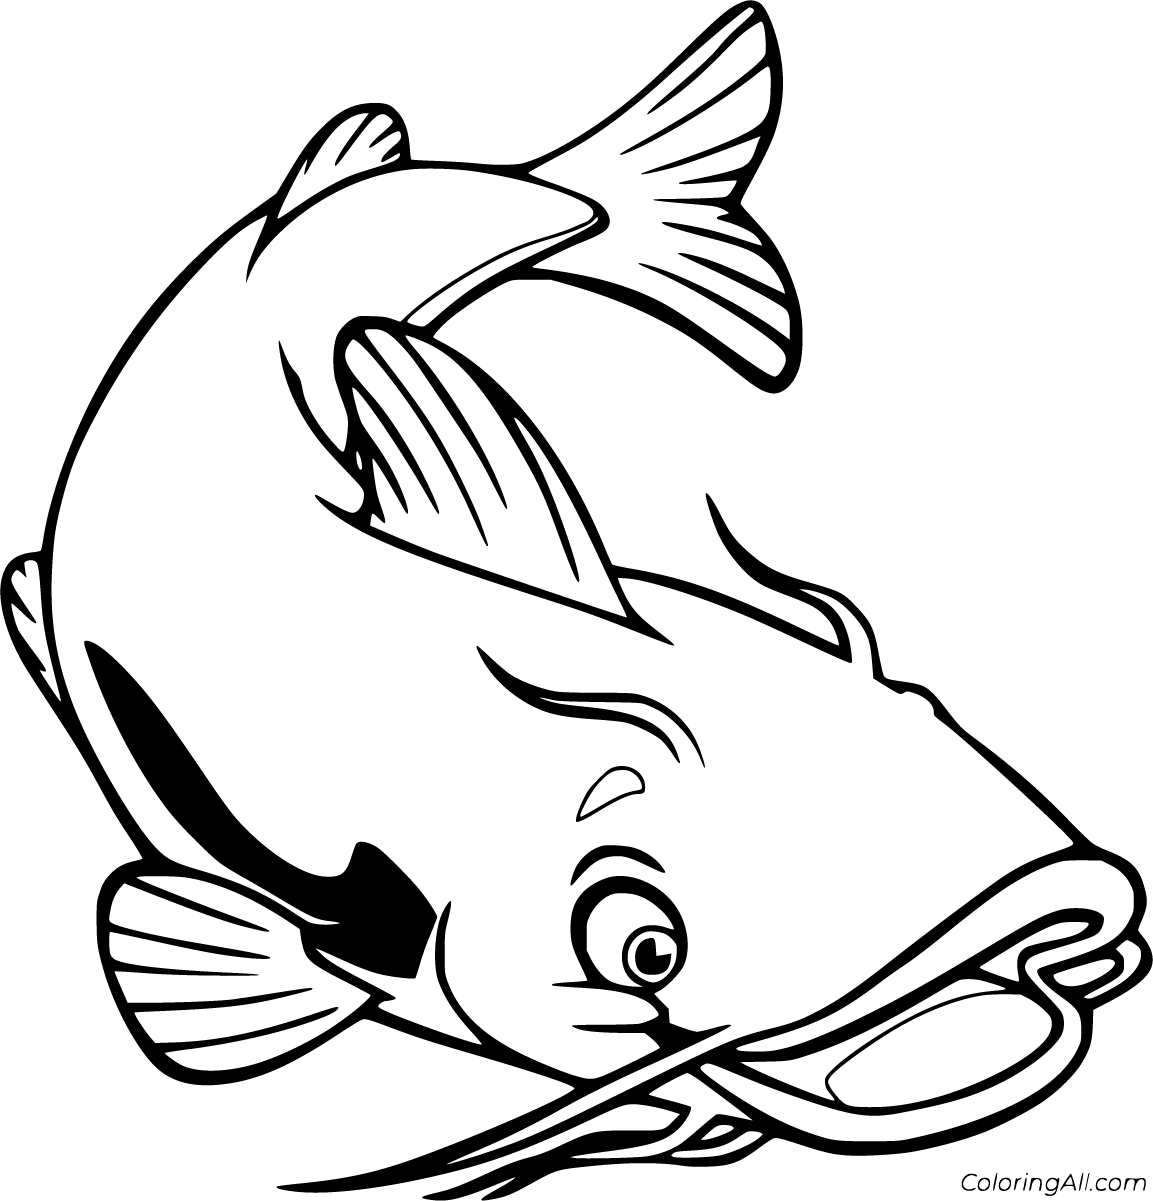 Download Catfish Coloring Pages - ColoringAll